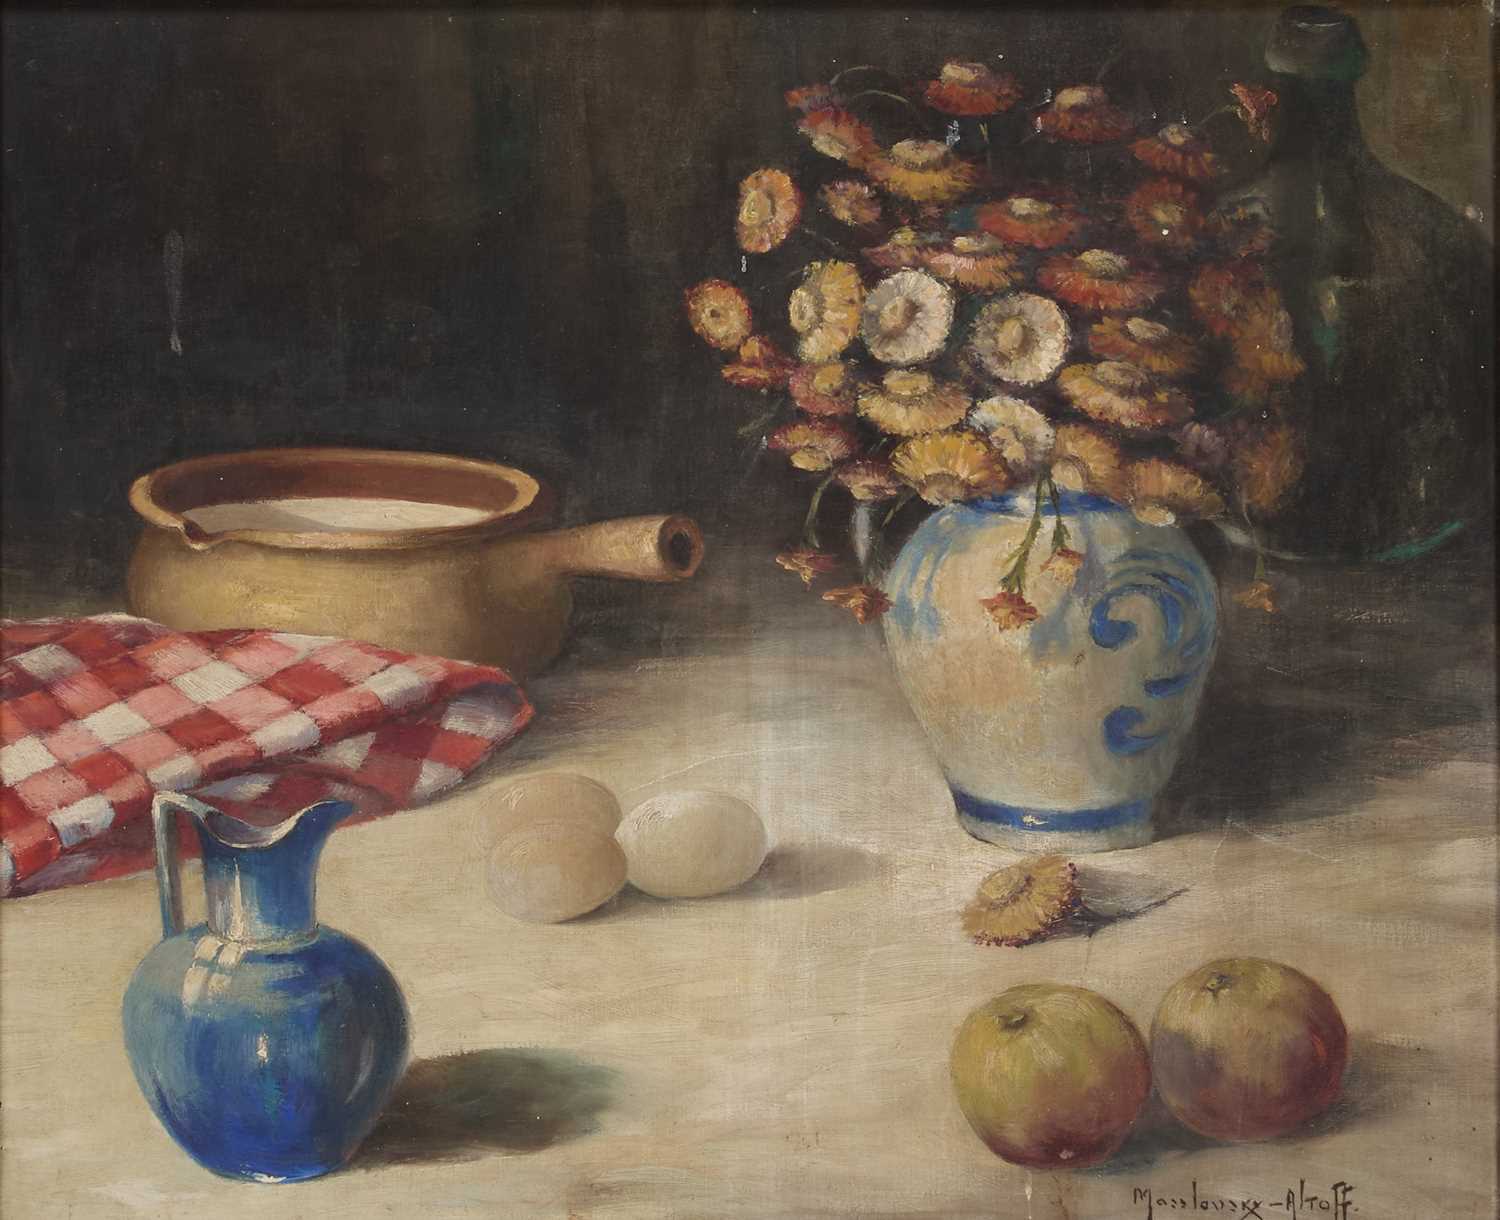 MASSLOUSKY ALTOFF (20TH CENTURY) STILL LIFE WITH FLOWERS, EGGS AND FRUIT